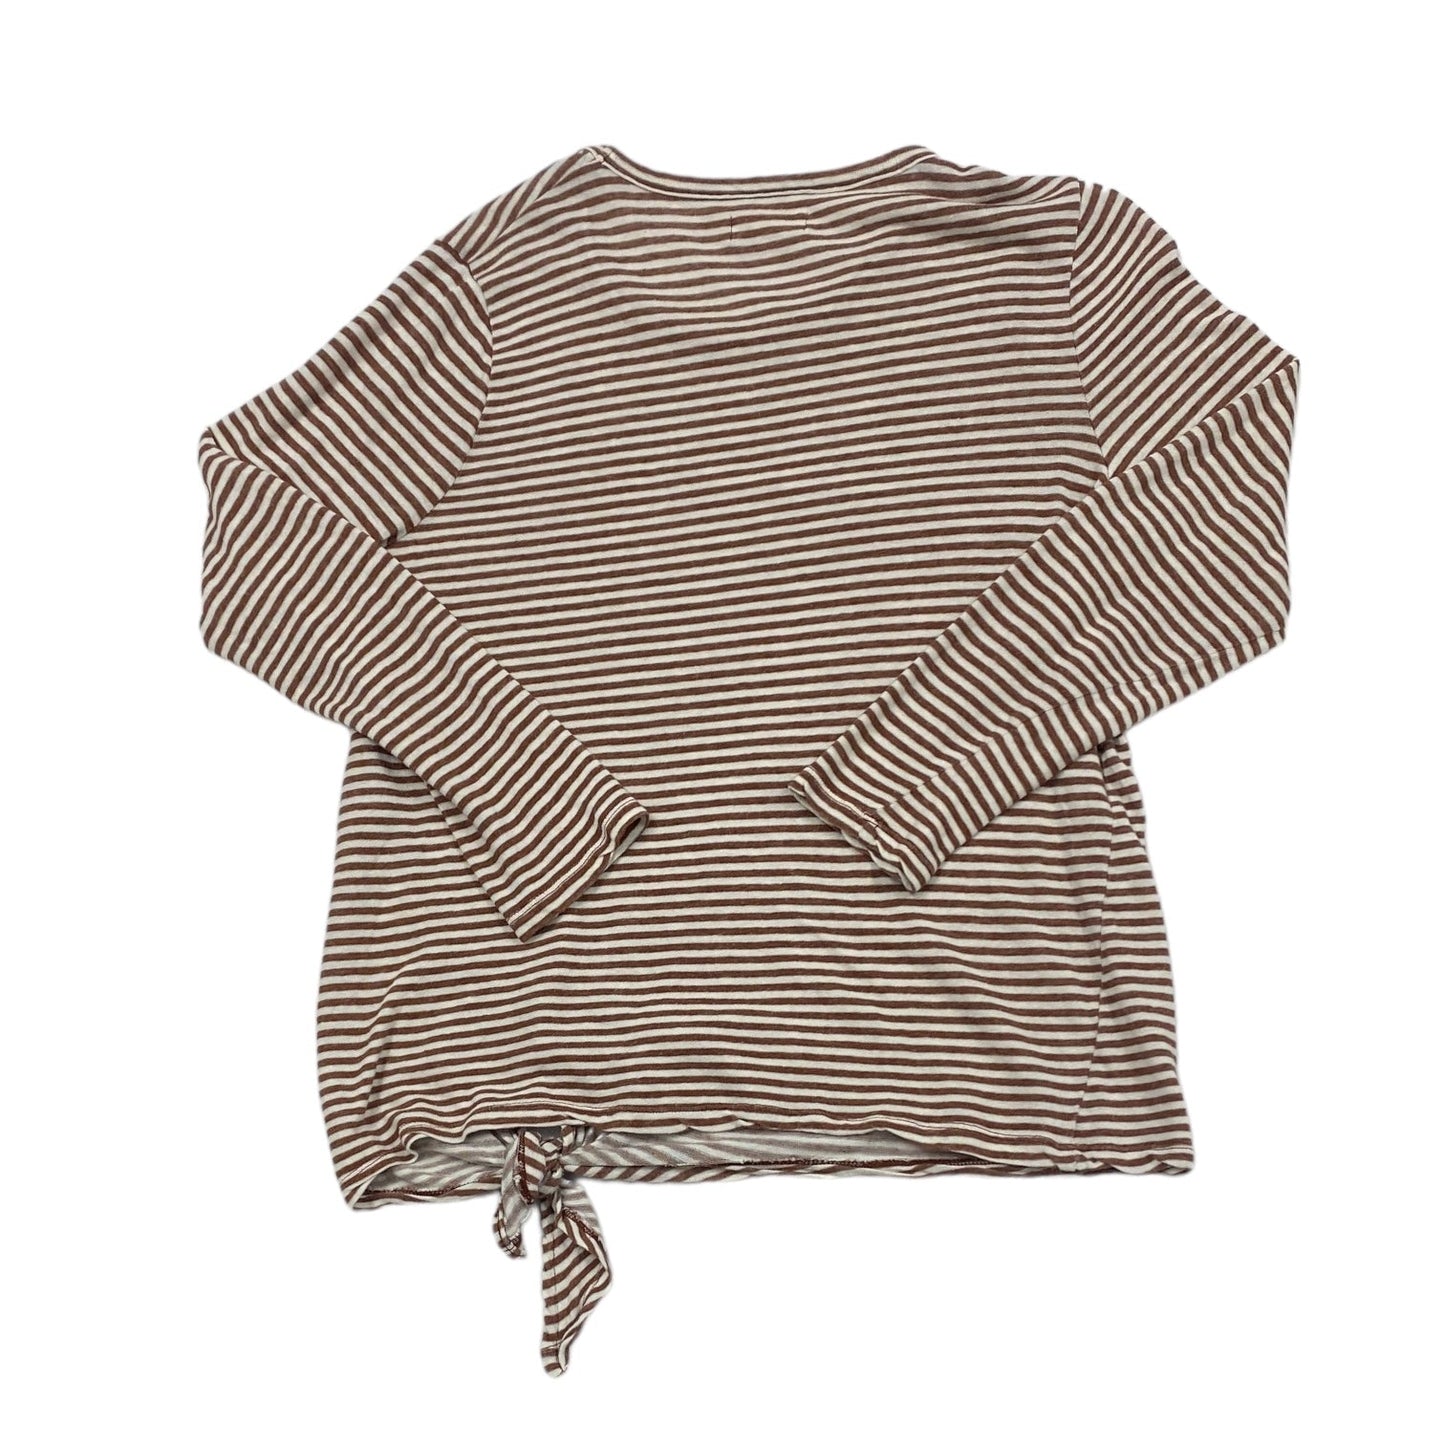 Striped Top Long Sleeve Madewell, Size Xl